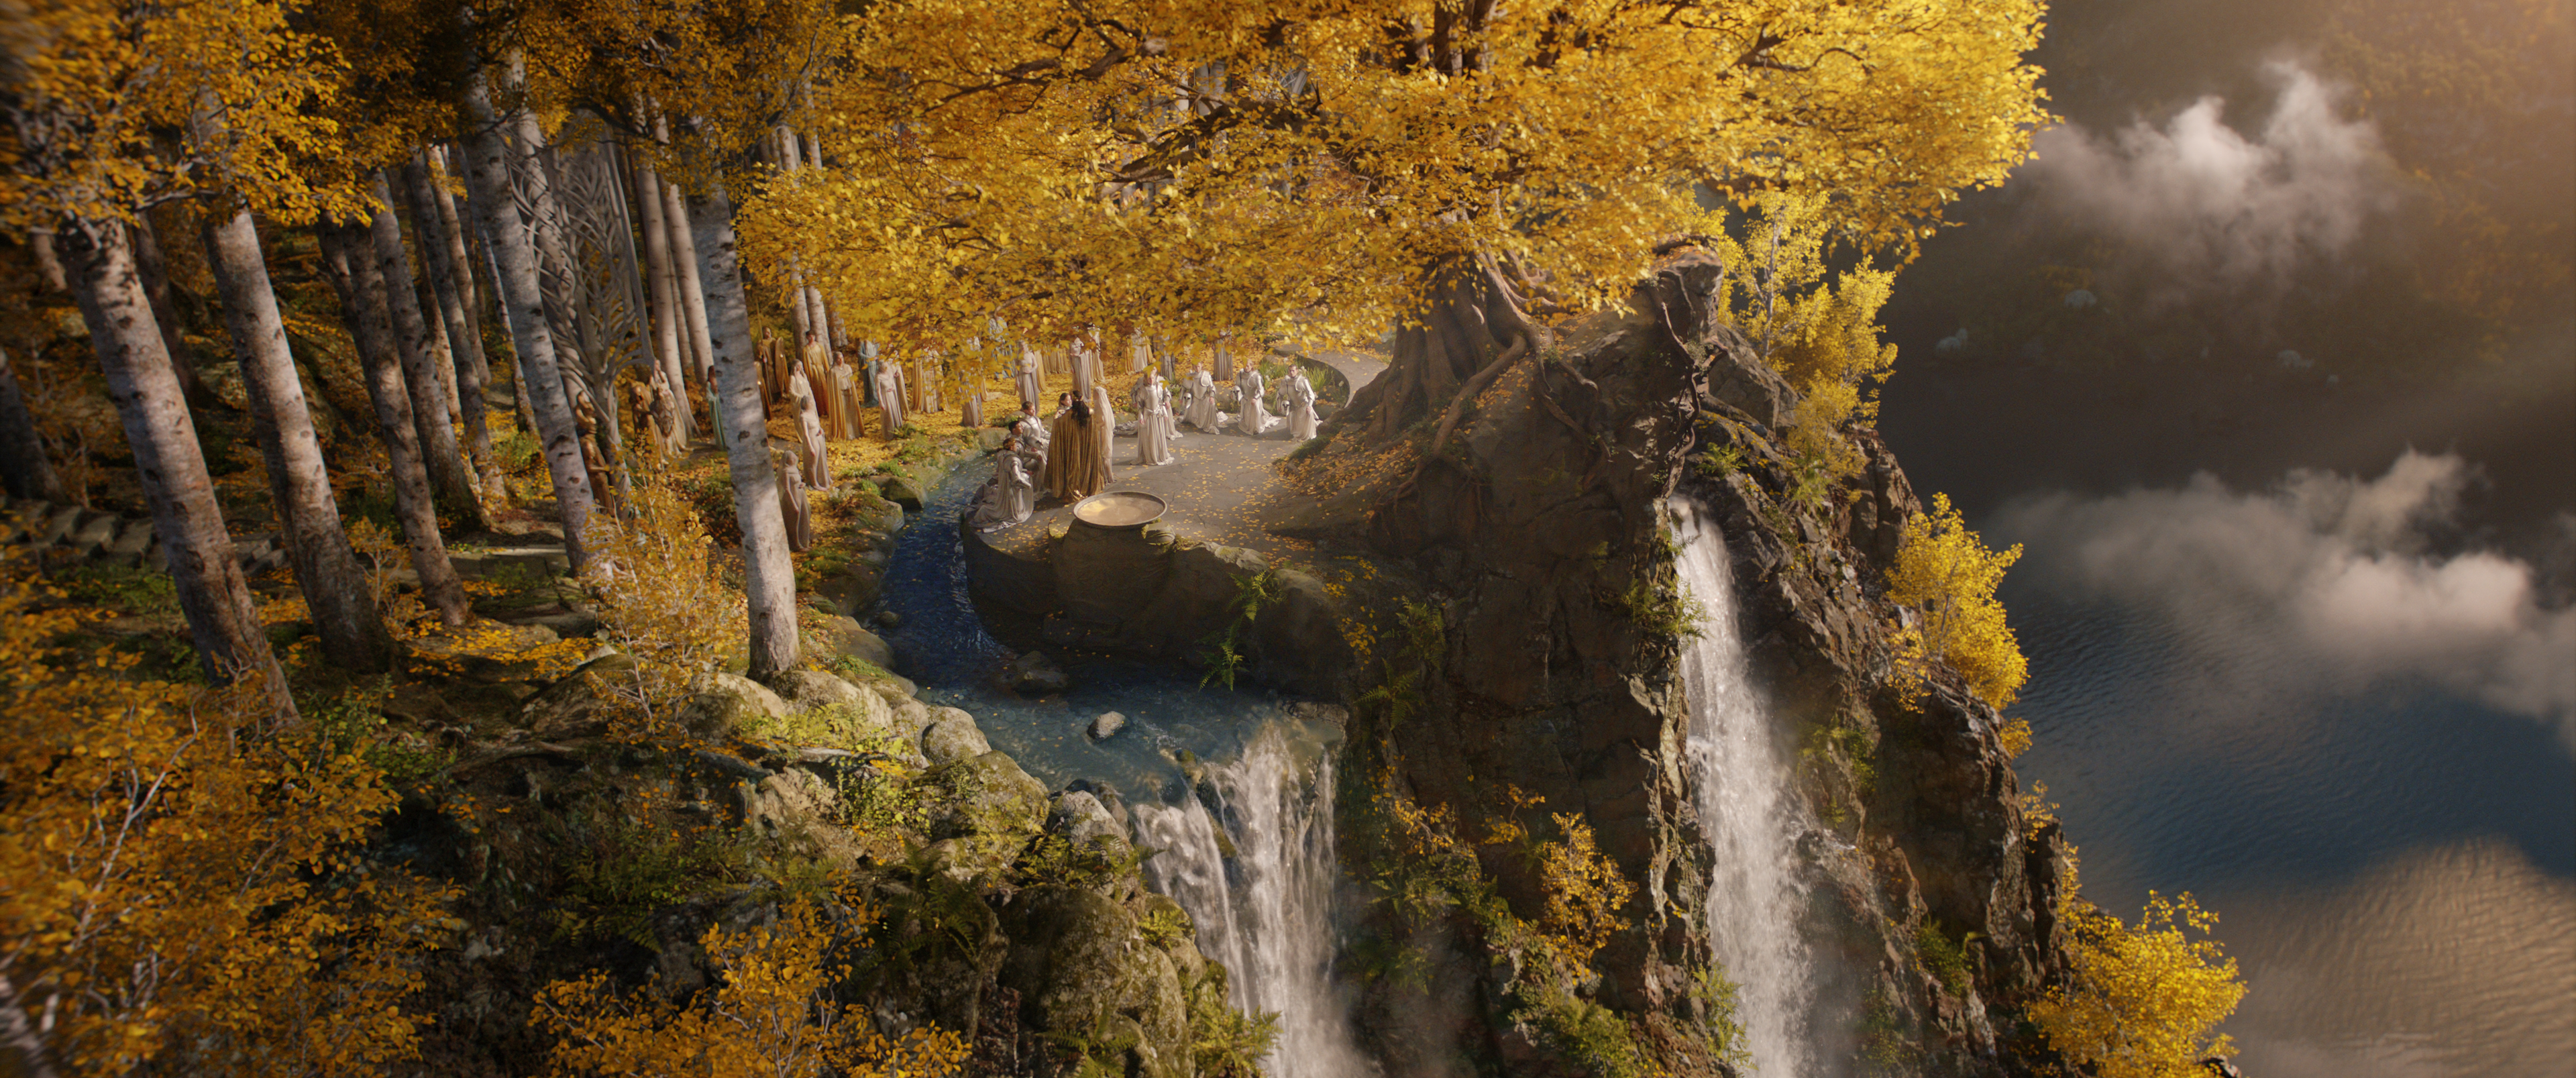 General 3840x1607 The Lord of the Rings Rings of Power TV series ultrawide film stills trees water waterfall clouds forest nature group of people